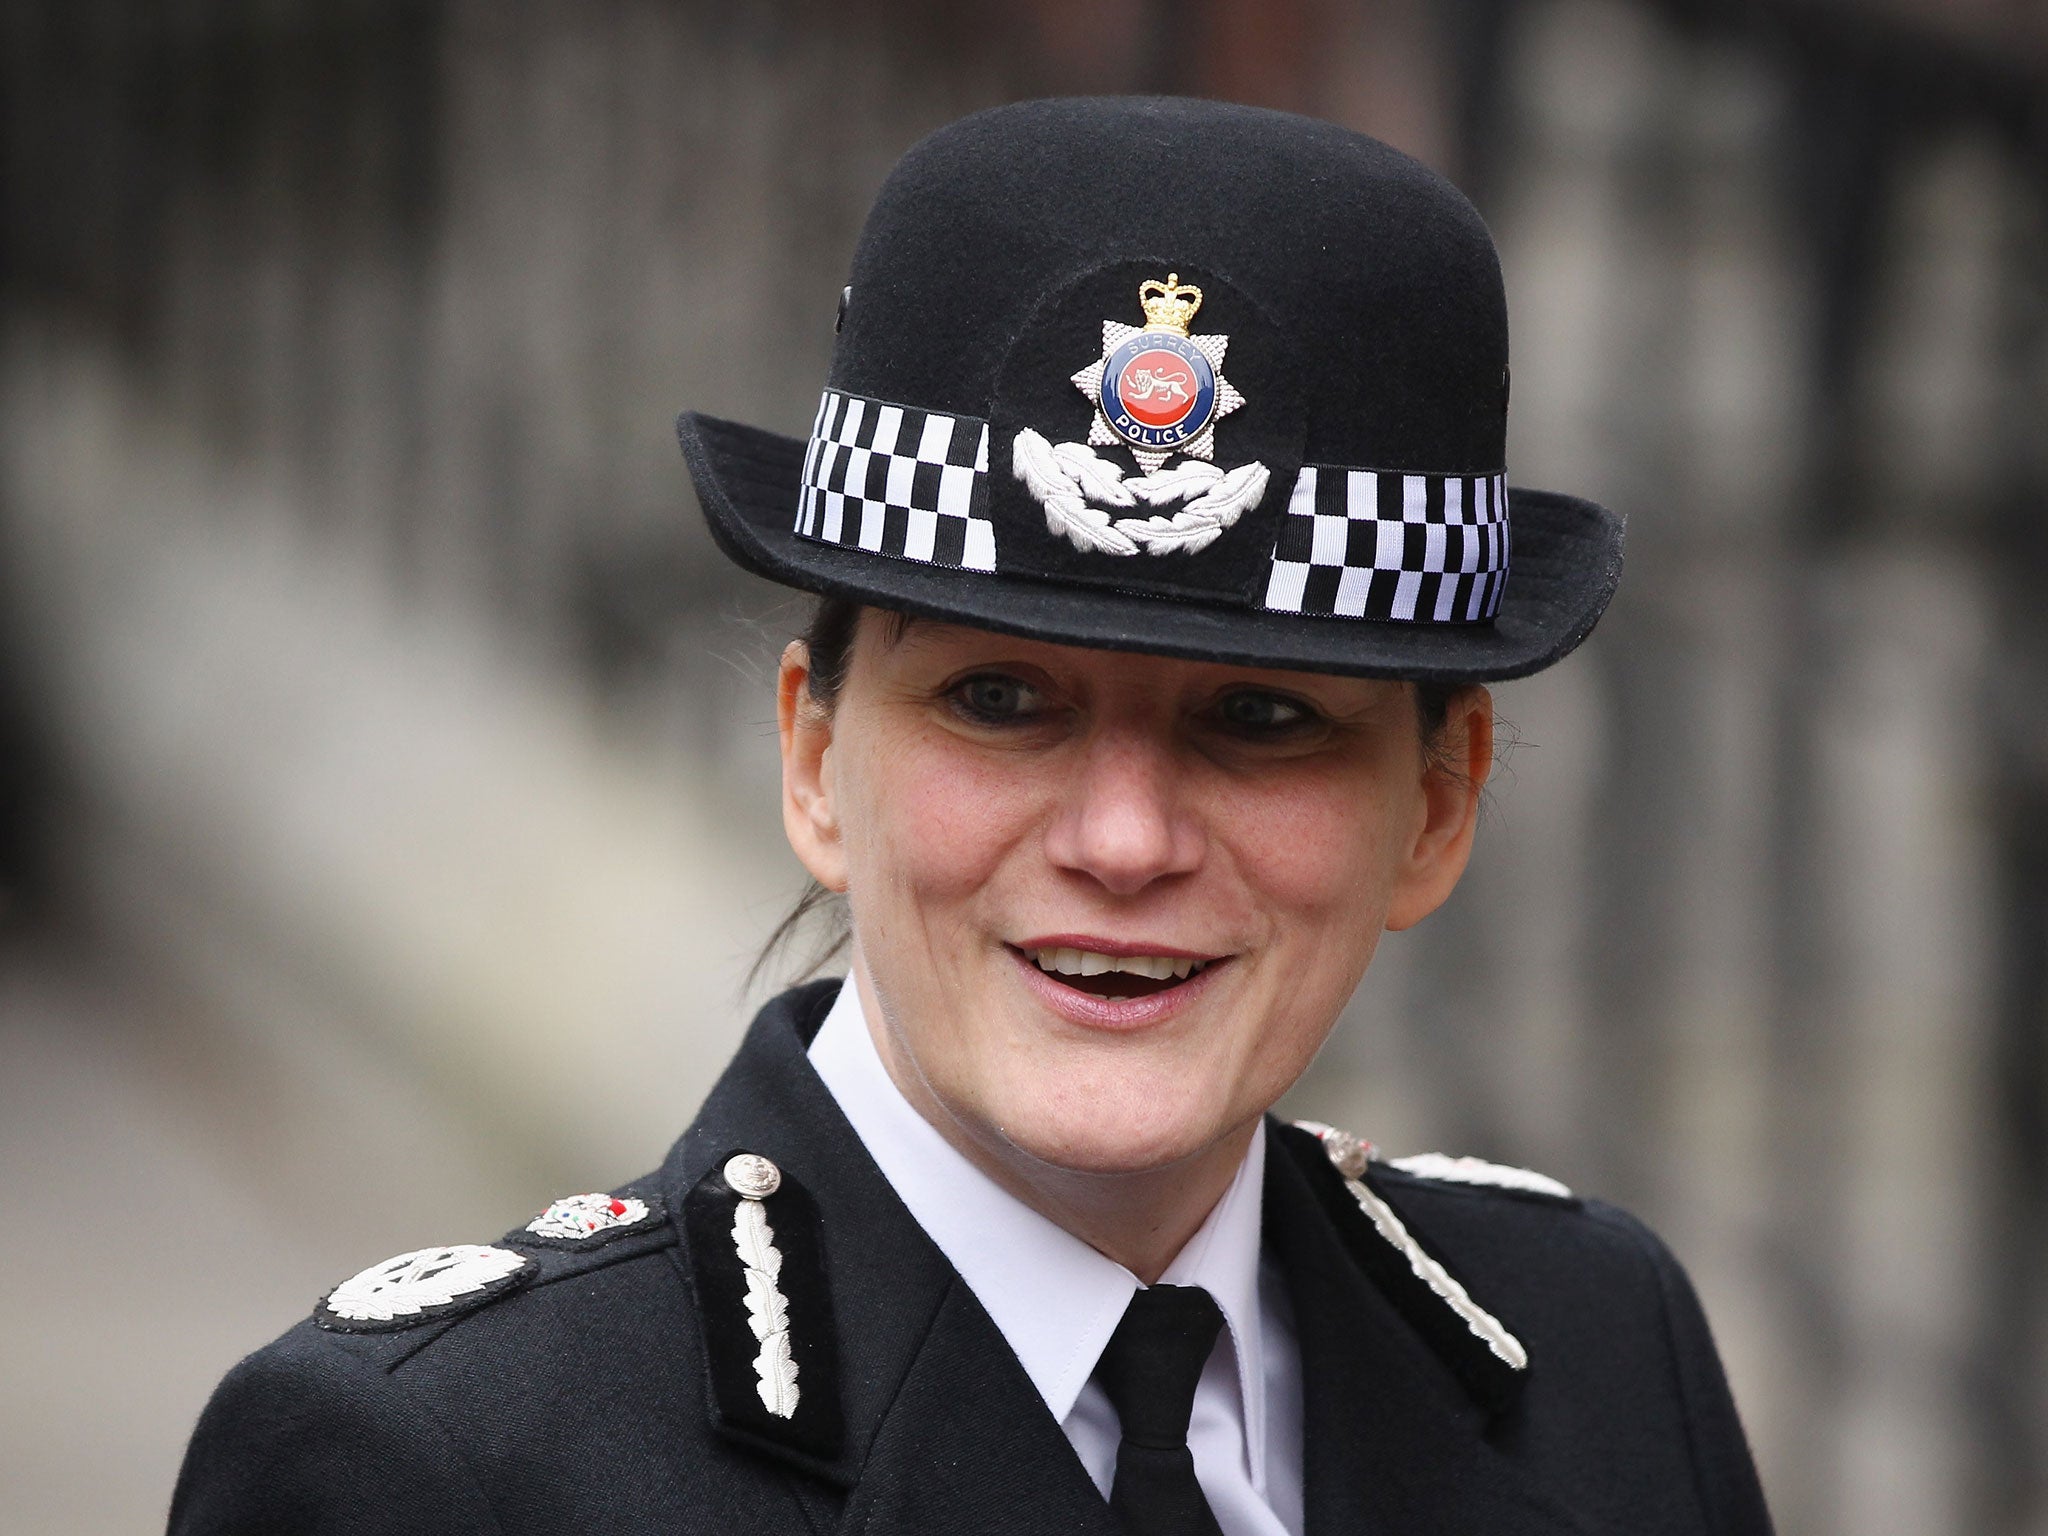 Lynne Owens said that she had been “bombarded” with requests for meetings from people who used to work in policing